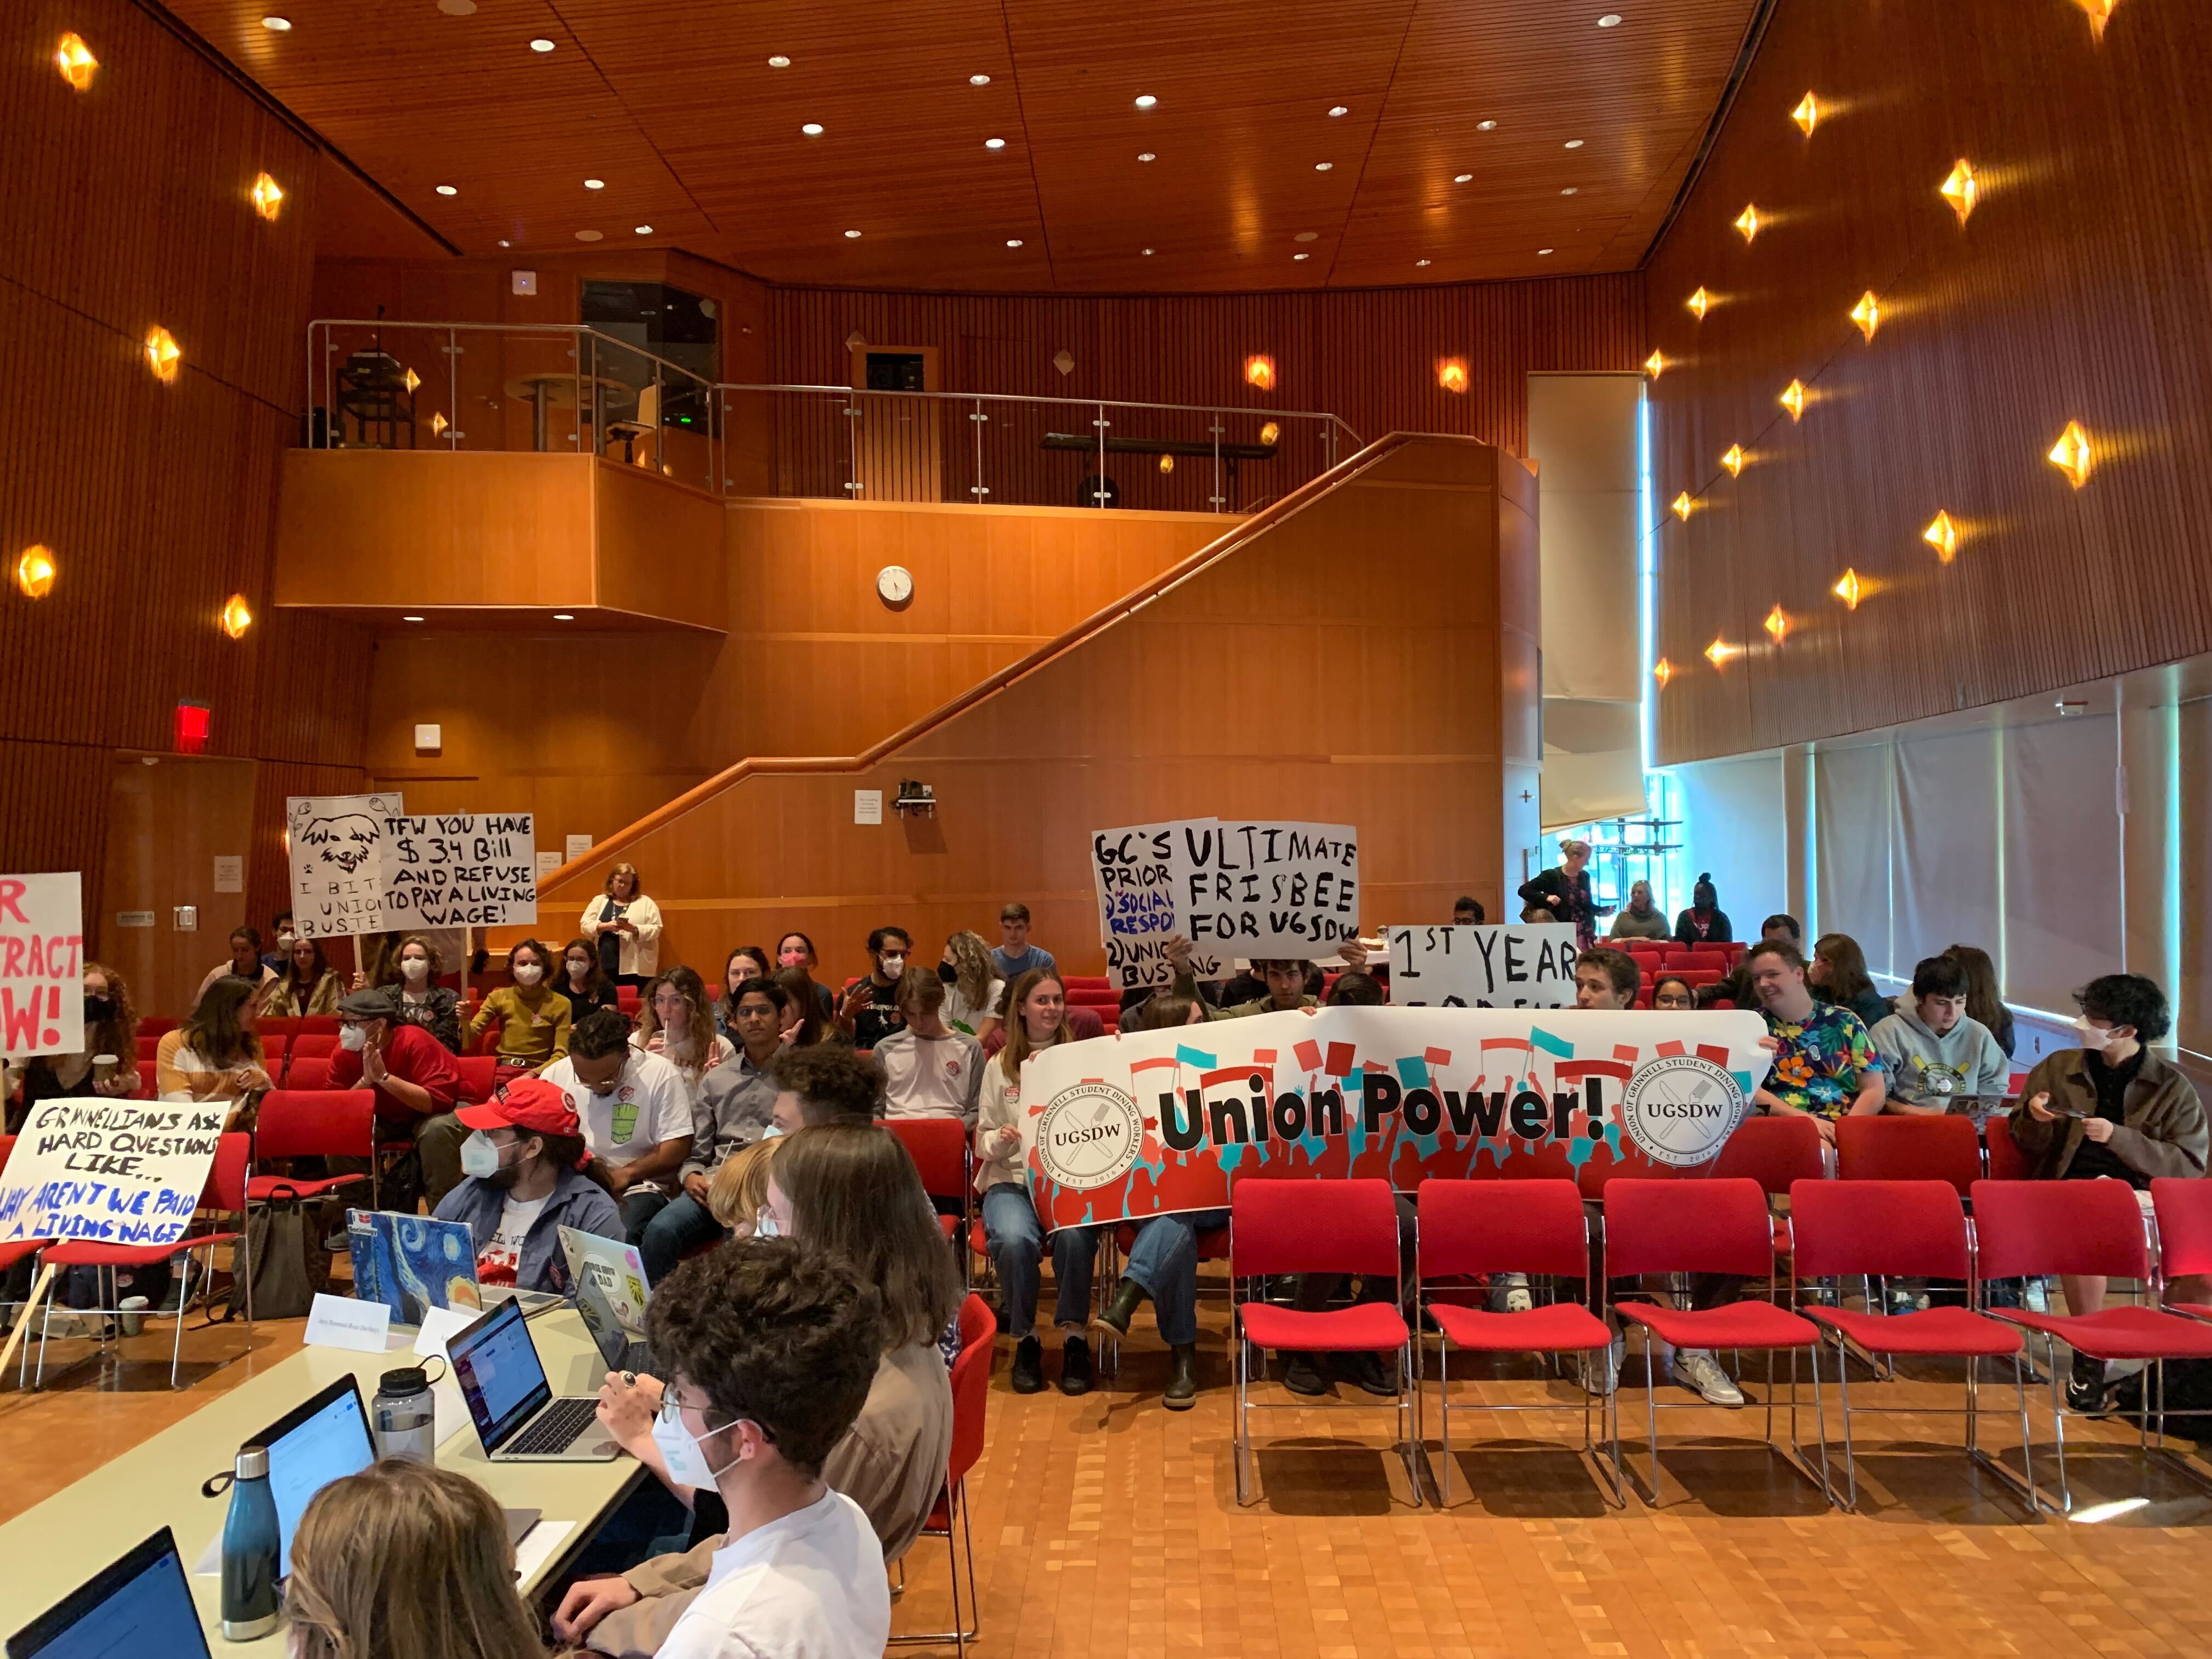 A photograph of the crowd observing the first bargaining session in JRC 101. They hold several pro-UGSDW signs, and most are wearing "UGSDW Fair Contract Now!" buttons.